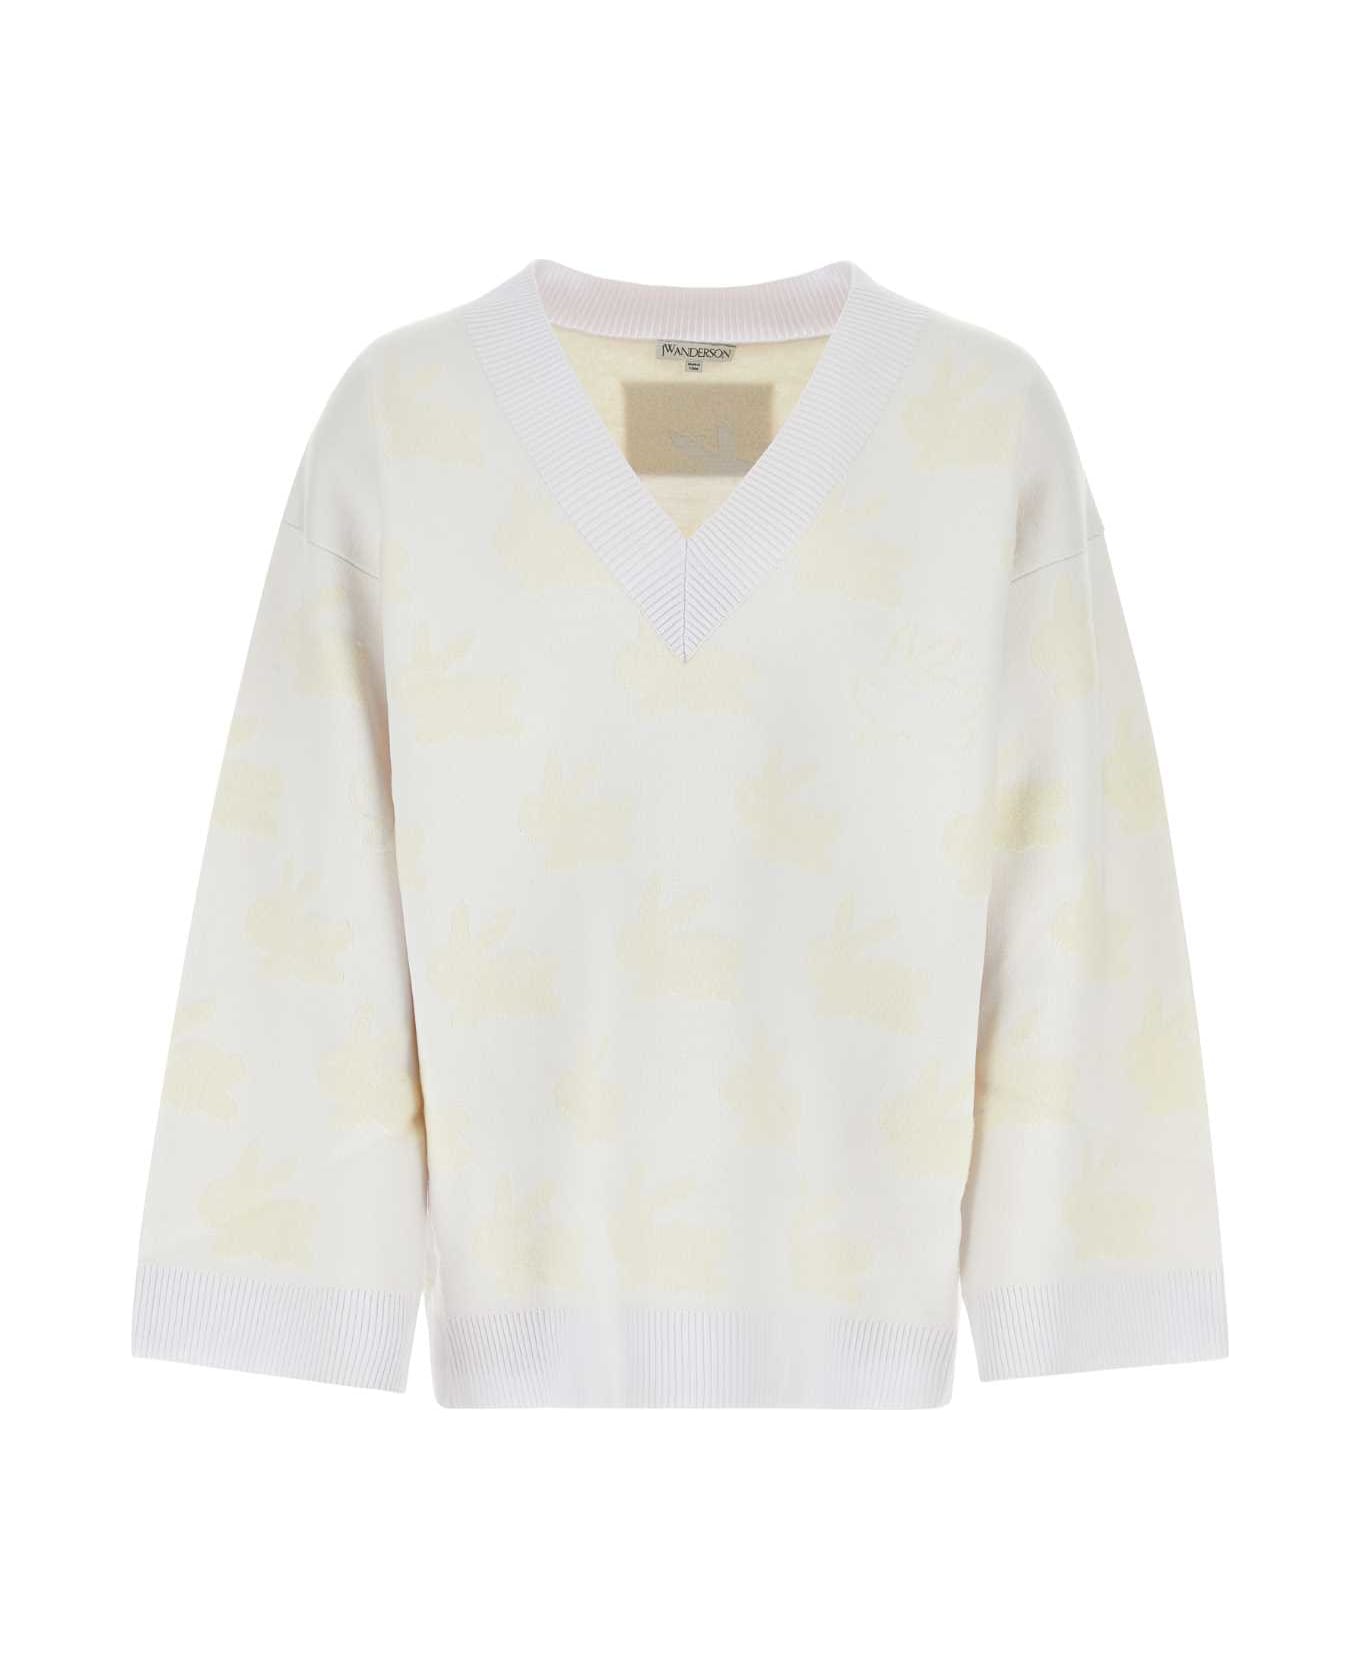 J.W. Anderson Embroidered Stretch Polyester Blend Sweater - WHITEIVORY ニットウェア